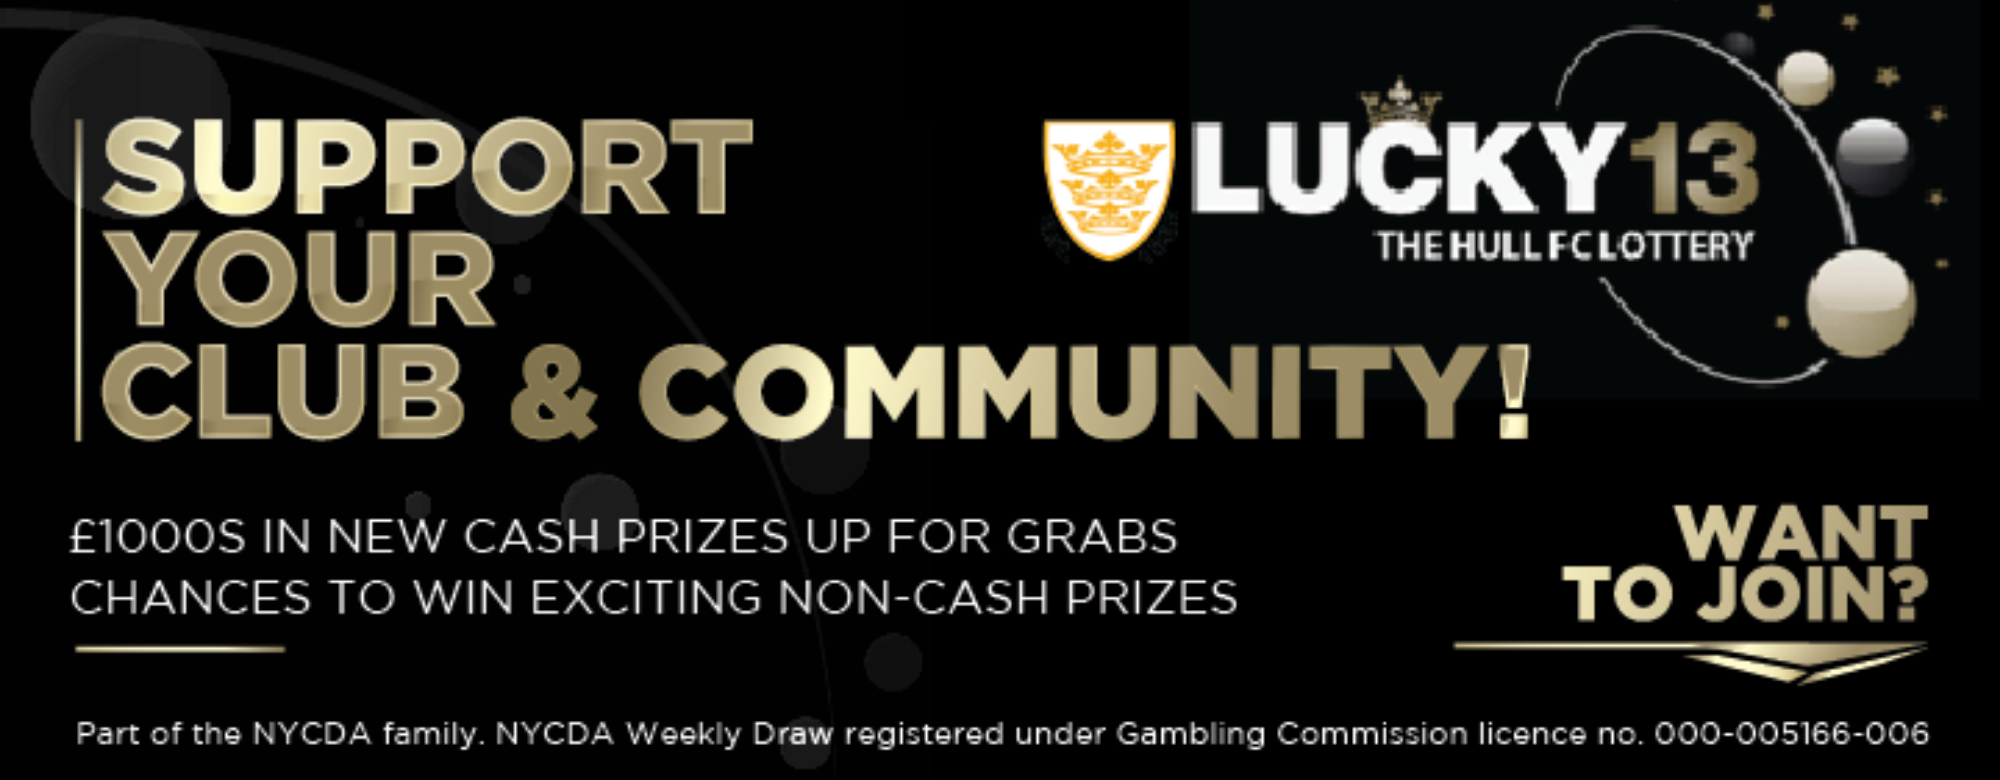 Hundreds Join Lucky13 Lottery To Support Club & Win Prizes!